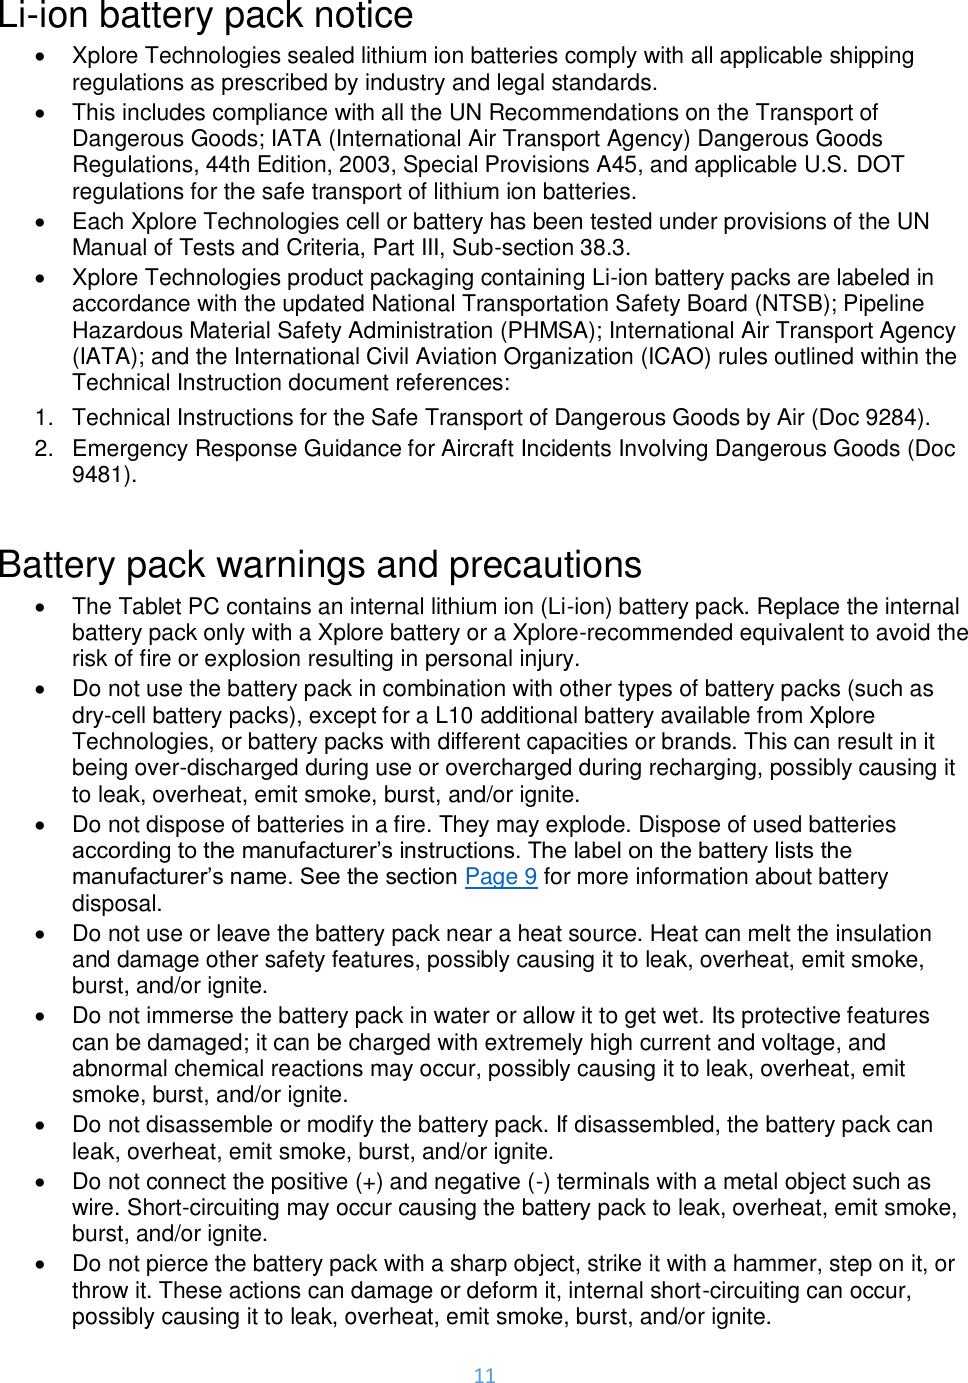 11  Li-ion battery pack notice •  Xplore Technologies sealed lithium ion batteries comply with all applicable shipping regulations as prescribed by industry and legal standards.  •  This includes compliance with all the UN Recommendations on the Transport of Dangerous Goods; IATA (International Air Transport Agency) Dangerous Goods Regulations, 44th Edition, 2003, Special Provisions A45, and applicable U.S. DOT regulations for the safe transport of lithium ion batteries.  •  Each Xplore Technologies cell or battery has been tested under provisions of the UN Manual of Tests and Criteria, Part III, Sub-section 38.3. •  Xplore Technologies product packaging containing Li-ion battery packs are labeled in accordance with the updated National Transportation Safety Board (NTSB); Pipeline Hazardous Material Safety Administration (PHMSA); International Air Transport Agency (IATA); and the International Civil Aviation Organization (ICAO) rules outlined within the Technical Instruction document references: 1.  Technical Instructions for the Safe Transport of Dangerous Goods by Air (Doc 9284). 2.  Emergency Response Guidance for Aircraft Incidents Involving Dangerous Goods (Doc 9481).  Battery pack warnings and precautions •  The Tablet PC contains an internal lithium ion (Li-ion) battery pack. Replace the internal battery pack only with a Xplore battery or a Xplore-recommended equivalent to avoid the risk of fire or explosion resulting in personal injury. •  Do not use the battery pack in combination with other types of battery packs (such as dry-cell battery packs), except for a L10 additional battery available from Xplore Technologies, or battery packs with different capacities or brands. This can result in it being over-discharged during use or overcharged during recharging, possibly causing it to leak, overheat, emit smoke, burst, and/or ignite. •  Do not dispose of batteries in a fire. They may explode. Dispose of used batteries according to the manufacturer’s instructions. The label on the battery lists the manufacturer’s name. See the section Page 9 for more information about battery disposal. •  Do not use or leave the battery pack near a heat source. Heat can melt the insulation and damage other safety features, possibly causing it to leak, overheat, emit smoke, burst, and/or ignite. •  Do not immerse the battery pack in water or allow it to get wet. Its protective features can be damaged; it can be charged with extremely high current and voltage, and abnormal chemical reactions may occur, possibly causing it to leak, overheat, emit smoke, burst, and/or ignite. •  Do not disassemble or modify the battery pack. If disassembled, the battery pack can leak, overheat, emit smoke, burst, and/or ignite. •  Do not connect the positive (+) and negative (-) terminals with a metal object such as wire. Short-circuiting may occur causing the battery pack to leak, overheat, emit smoke, burst, and/or ignite. •  Do not pierce the battery pack with a sharp object, strike it with a hammer, step on it, or throw it. These actions can damage or deform it, internal short-circuiting can occur, possibly causing it to leak, overheat, emit smoke, burst, and/or ignite. 